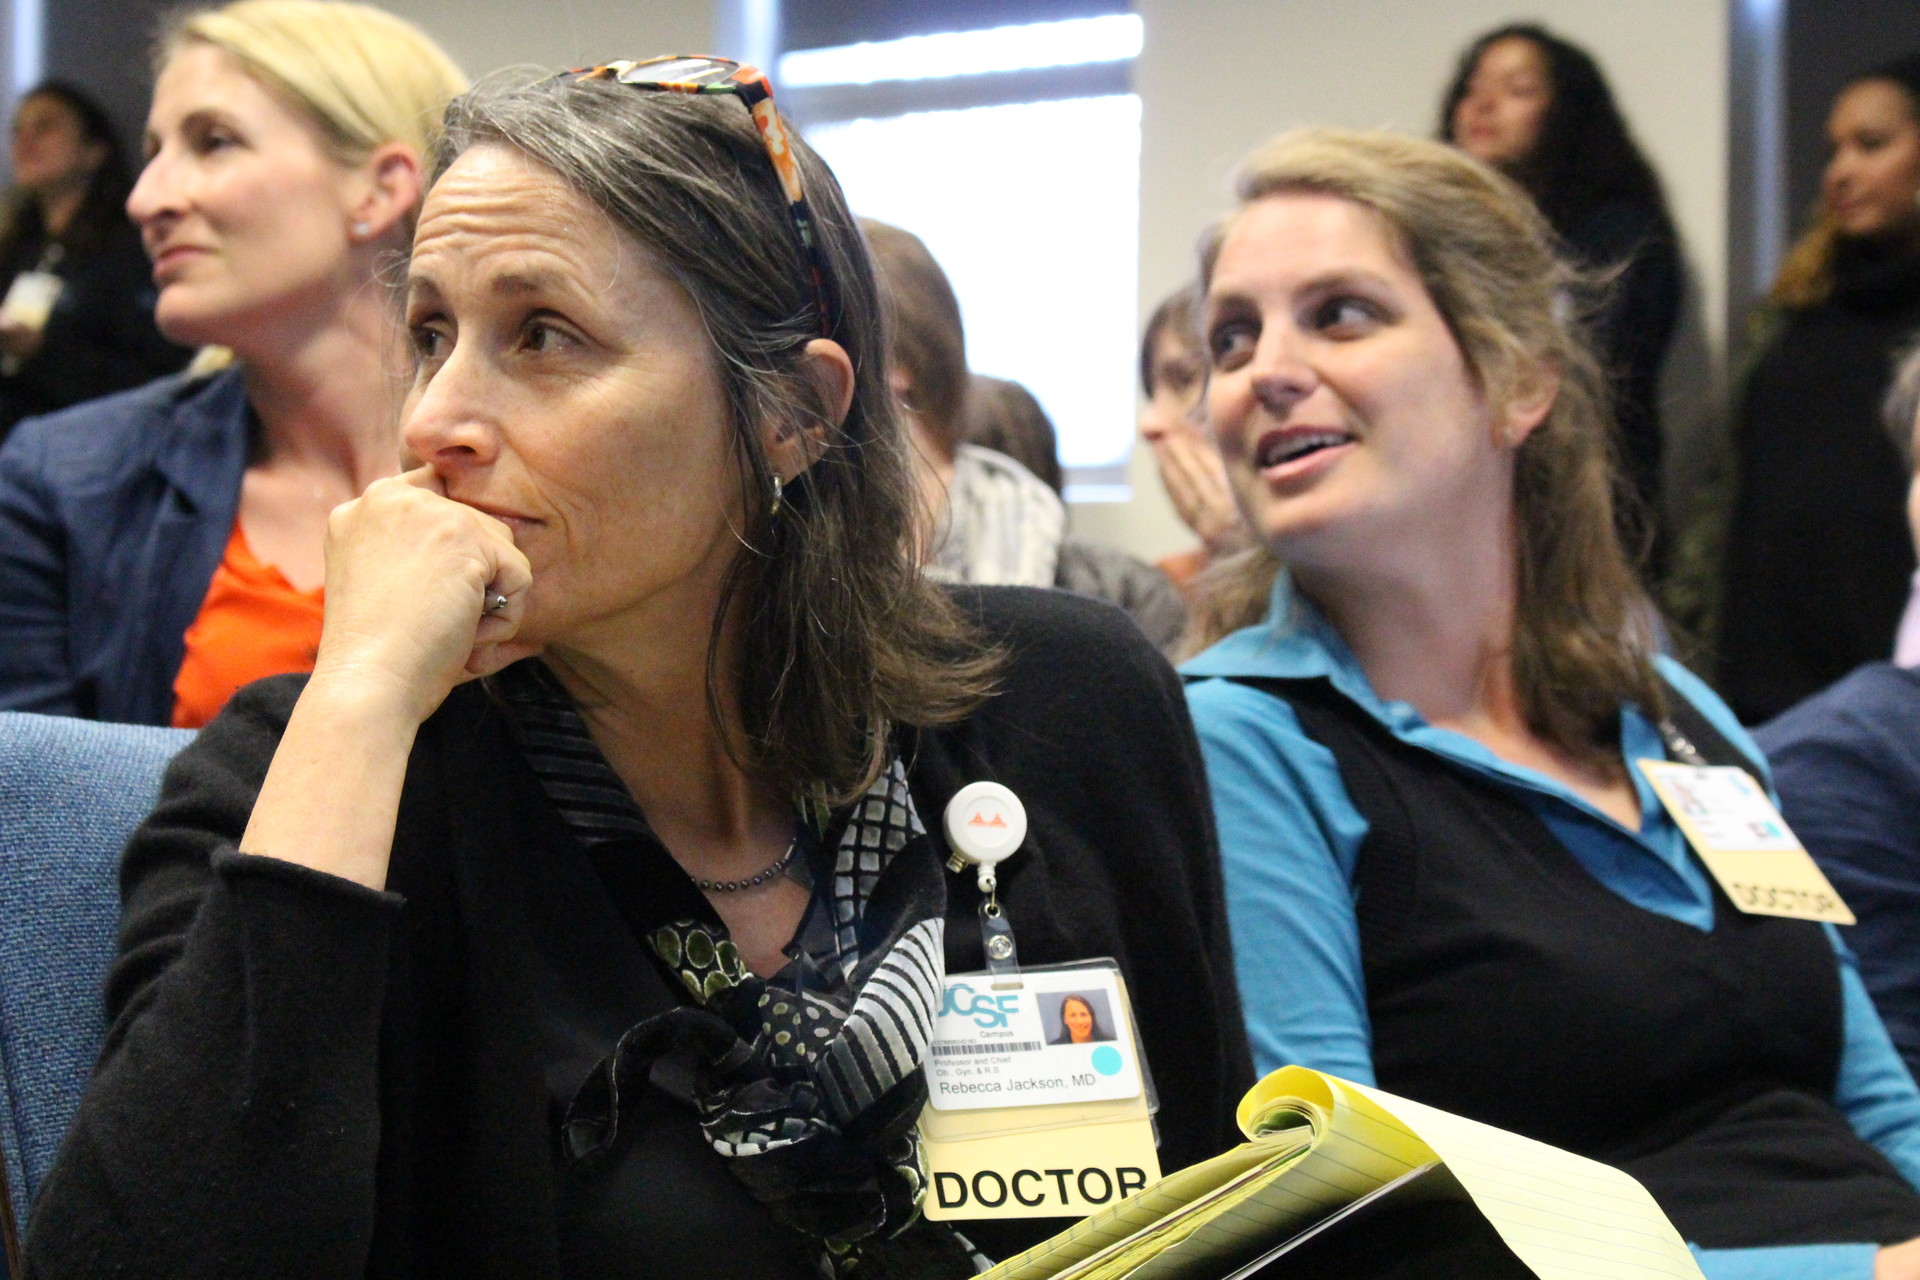 Dr. Rebecca Jackson, New Generation's main supervisor, and Dr. Valerie French (right), medical director, listen to speakers at a community forum in April about the potential closure of New Generation. After the meeting, Jackson said she was hopeful New Generation could find more funds to stay open "given the huge outpouring of concerned people." 